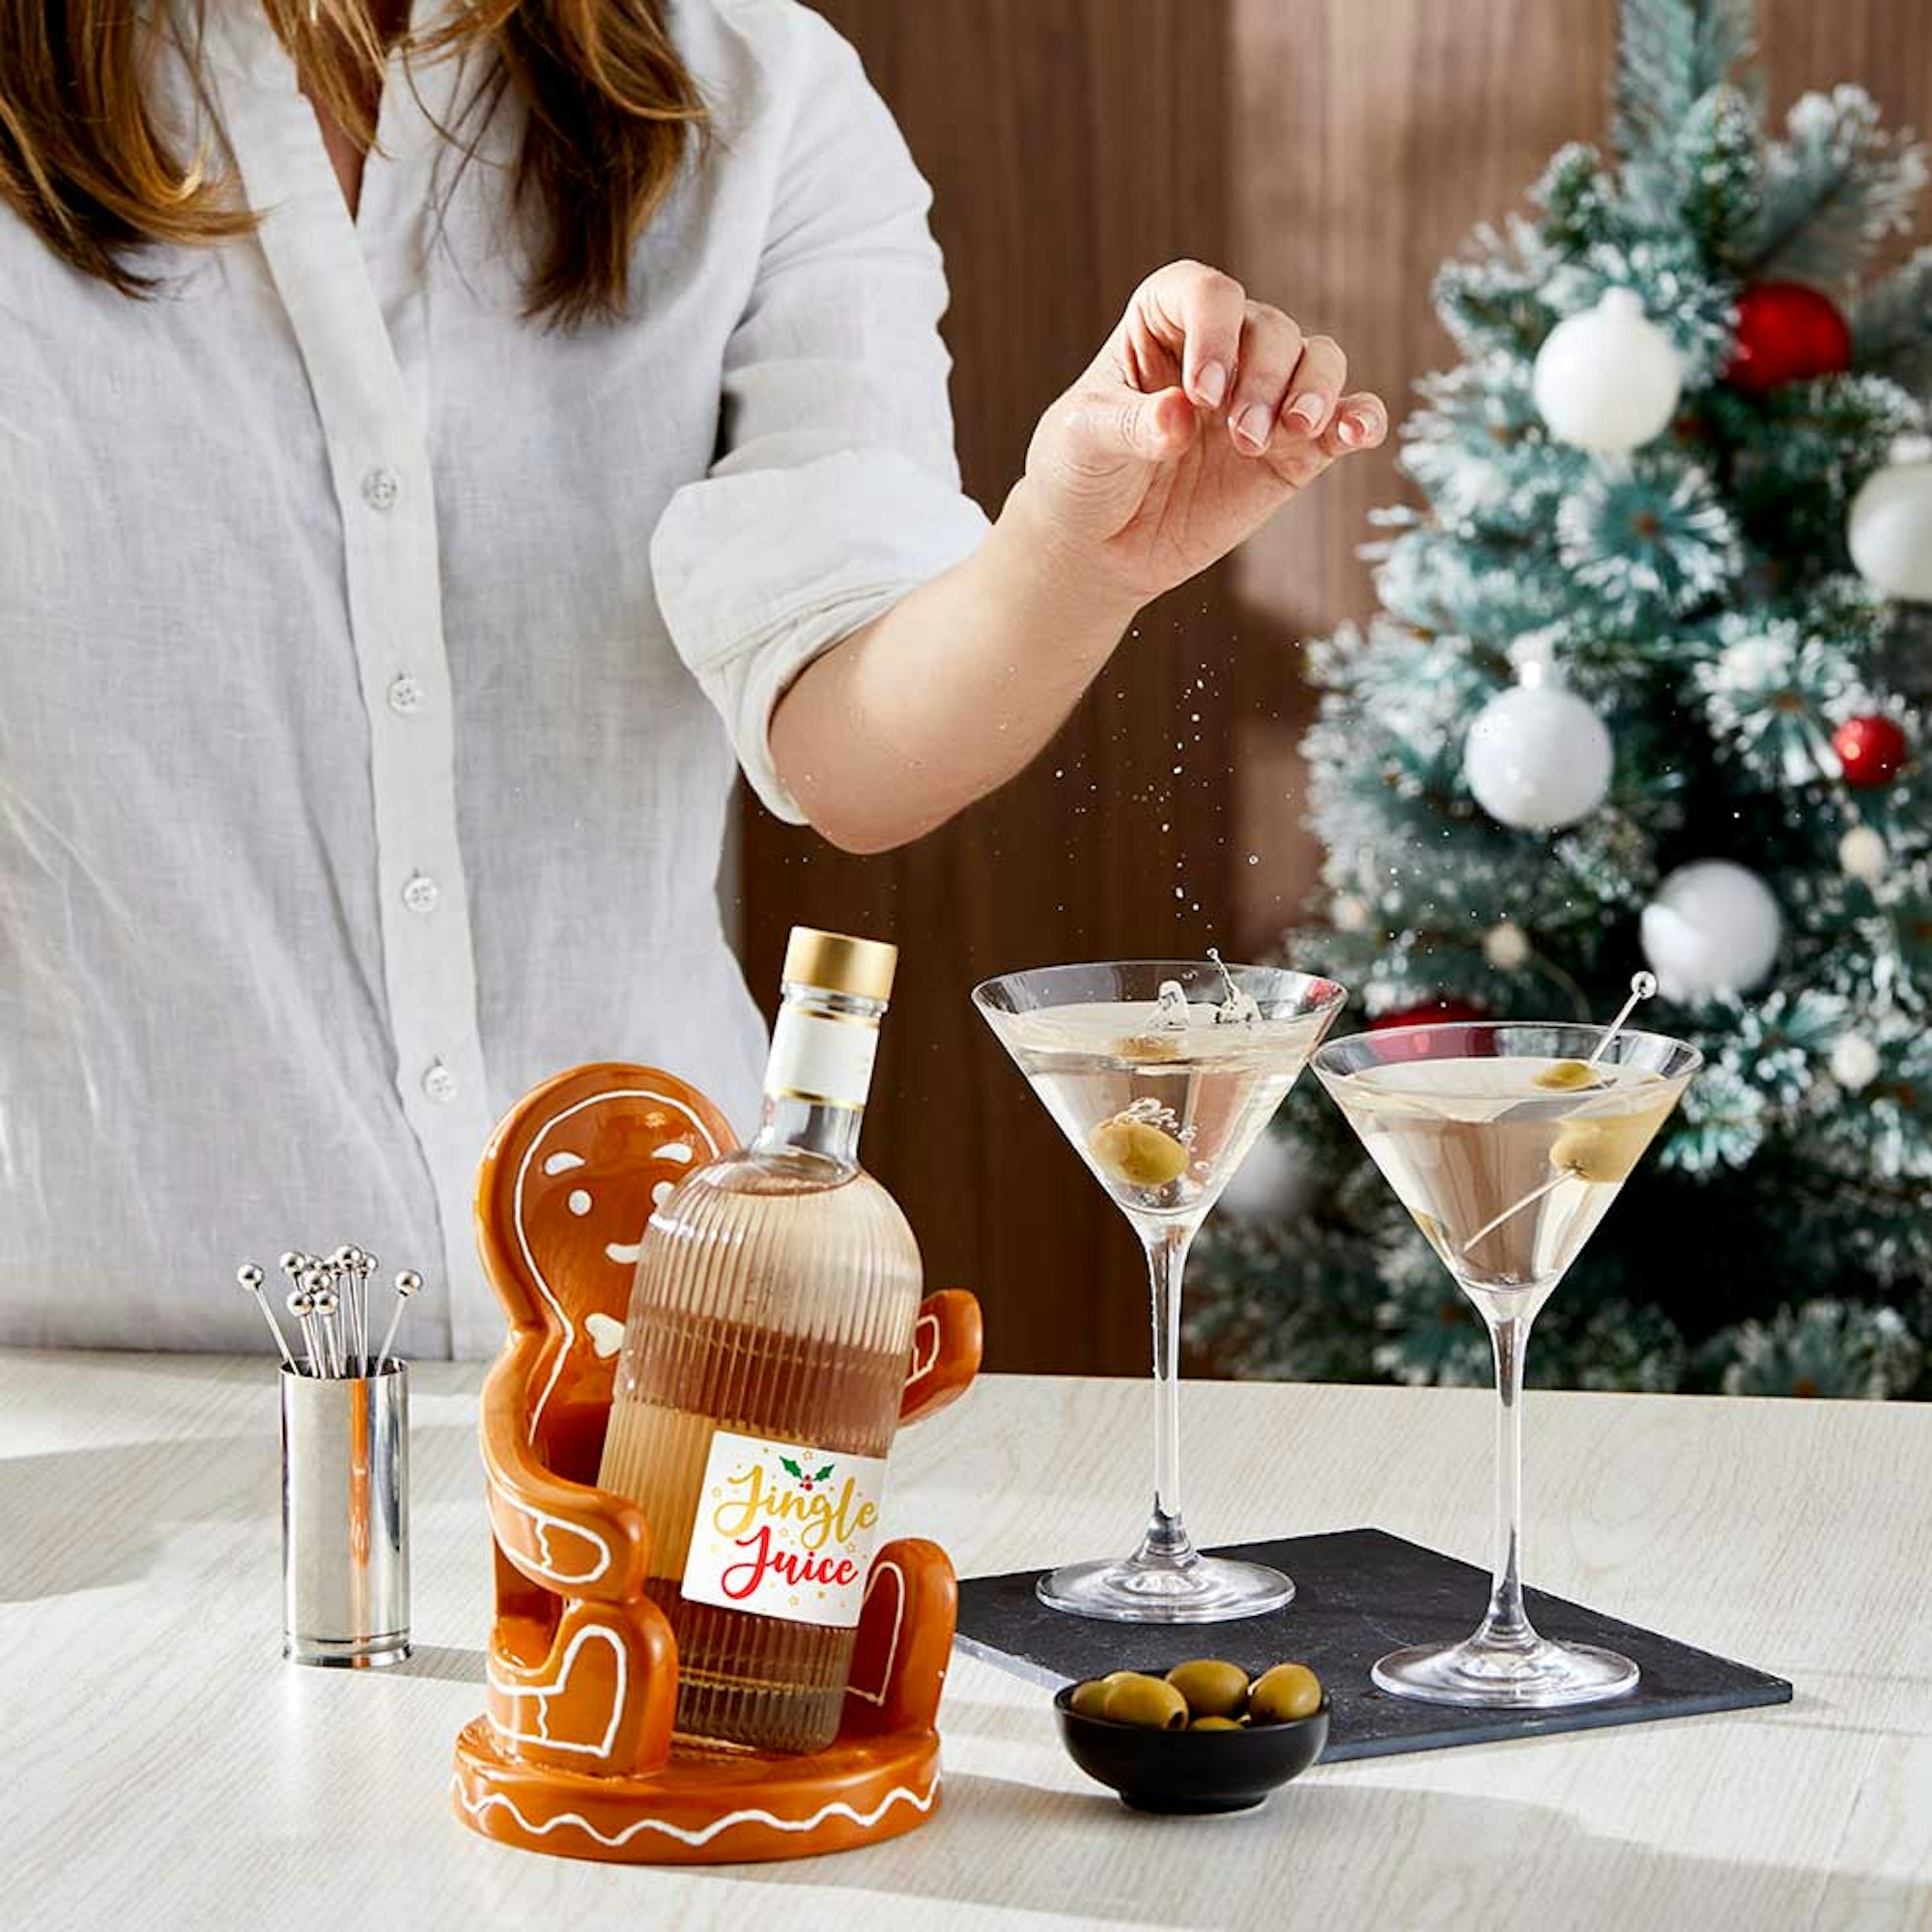 Christmas Gift Guide 2023. Gifts for colleagues. Gingerbread man bottle holder with woman sprinkling salt into a martini glass.